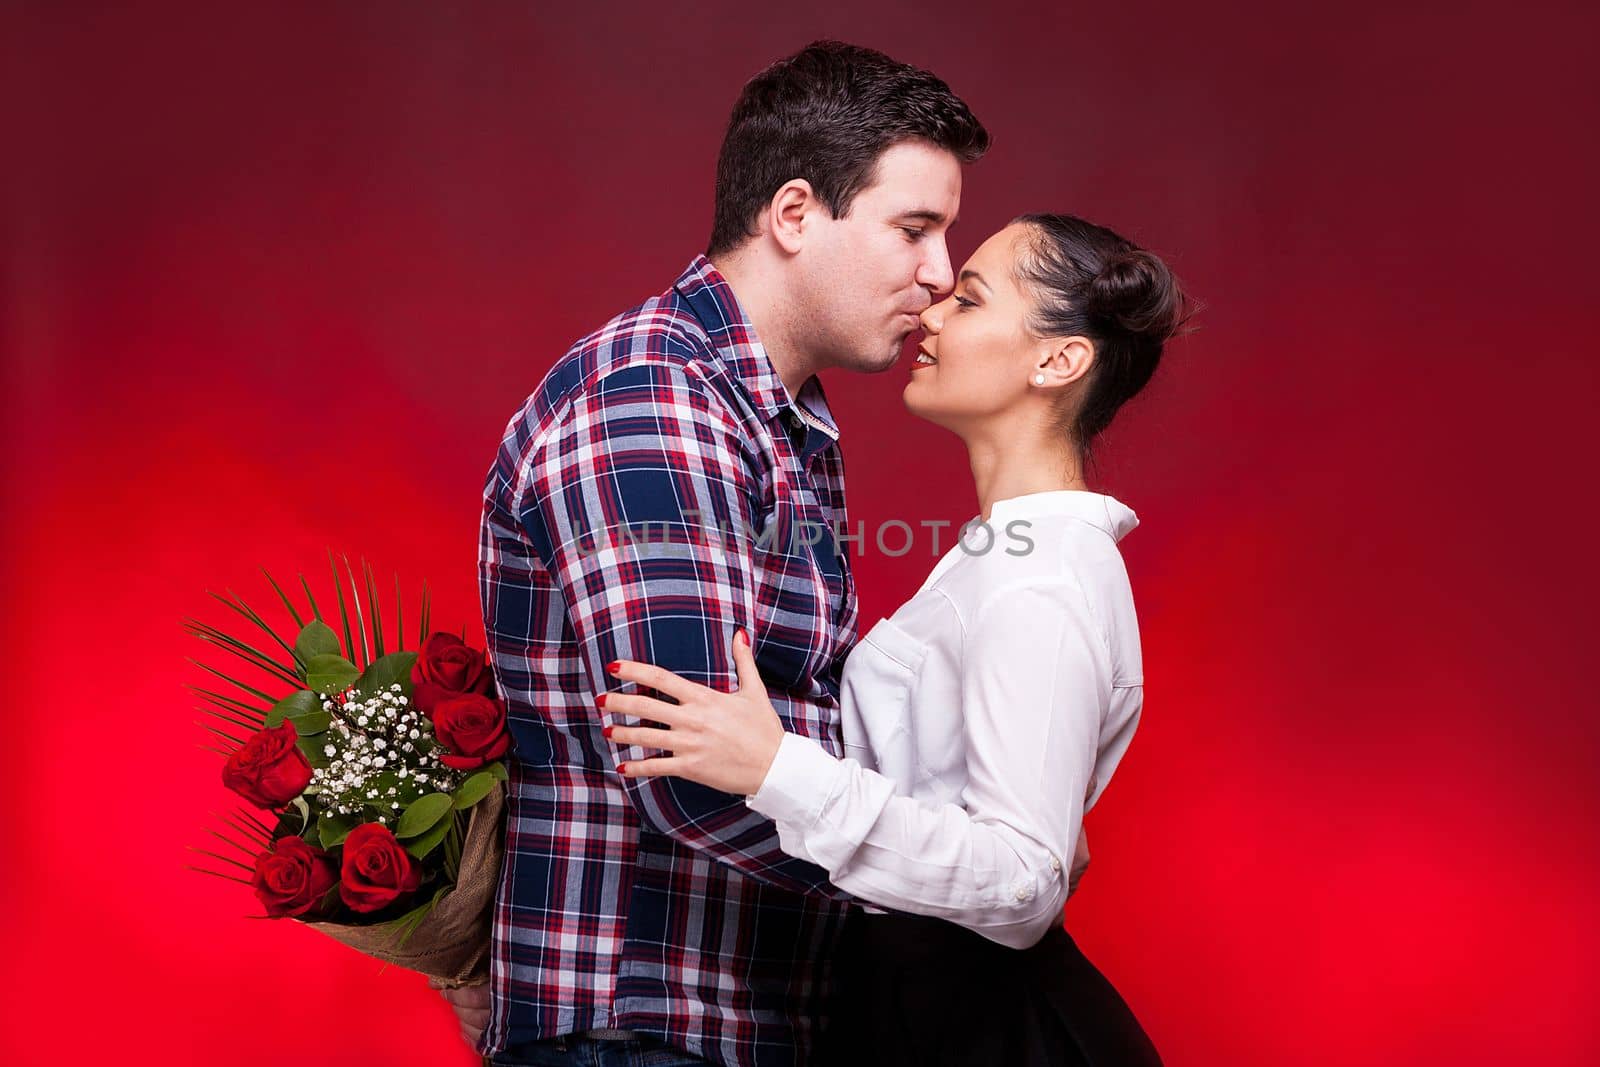 Man with a roses bouquet at his back kissing a beautiful woman on the nose. Red background and studio photo